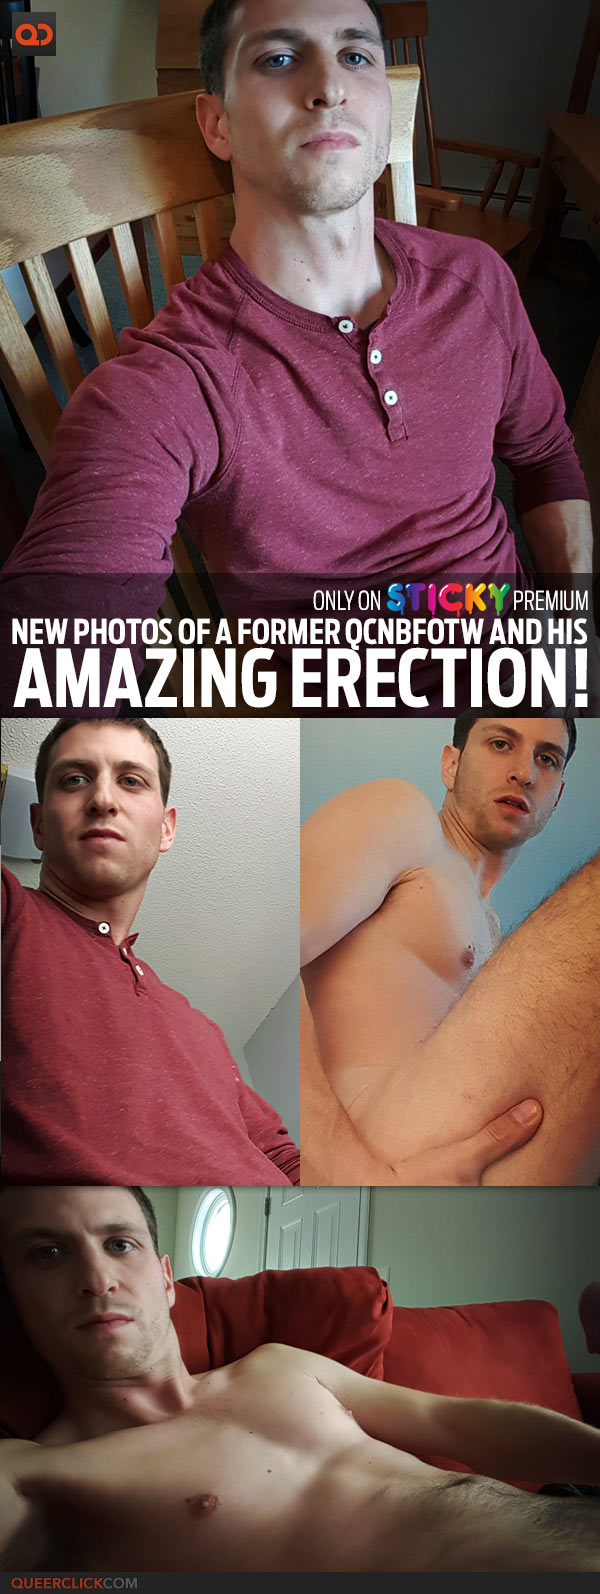 New Photos Of A Former QCNBFOTW And His Amazing Erection!